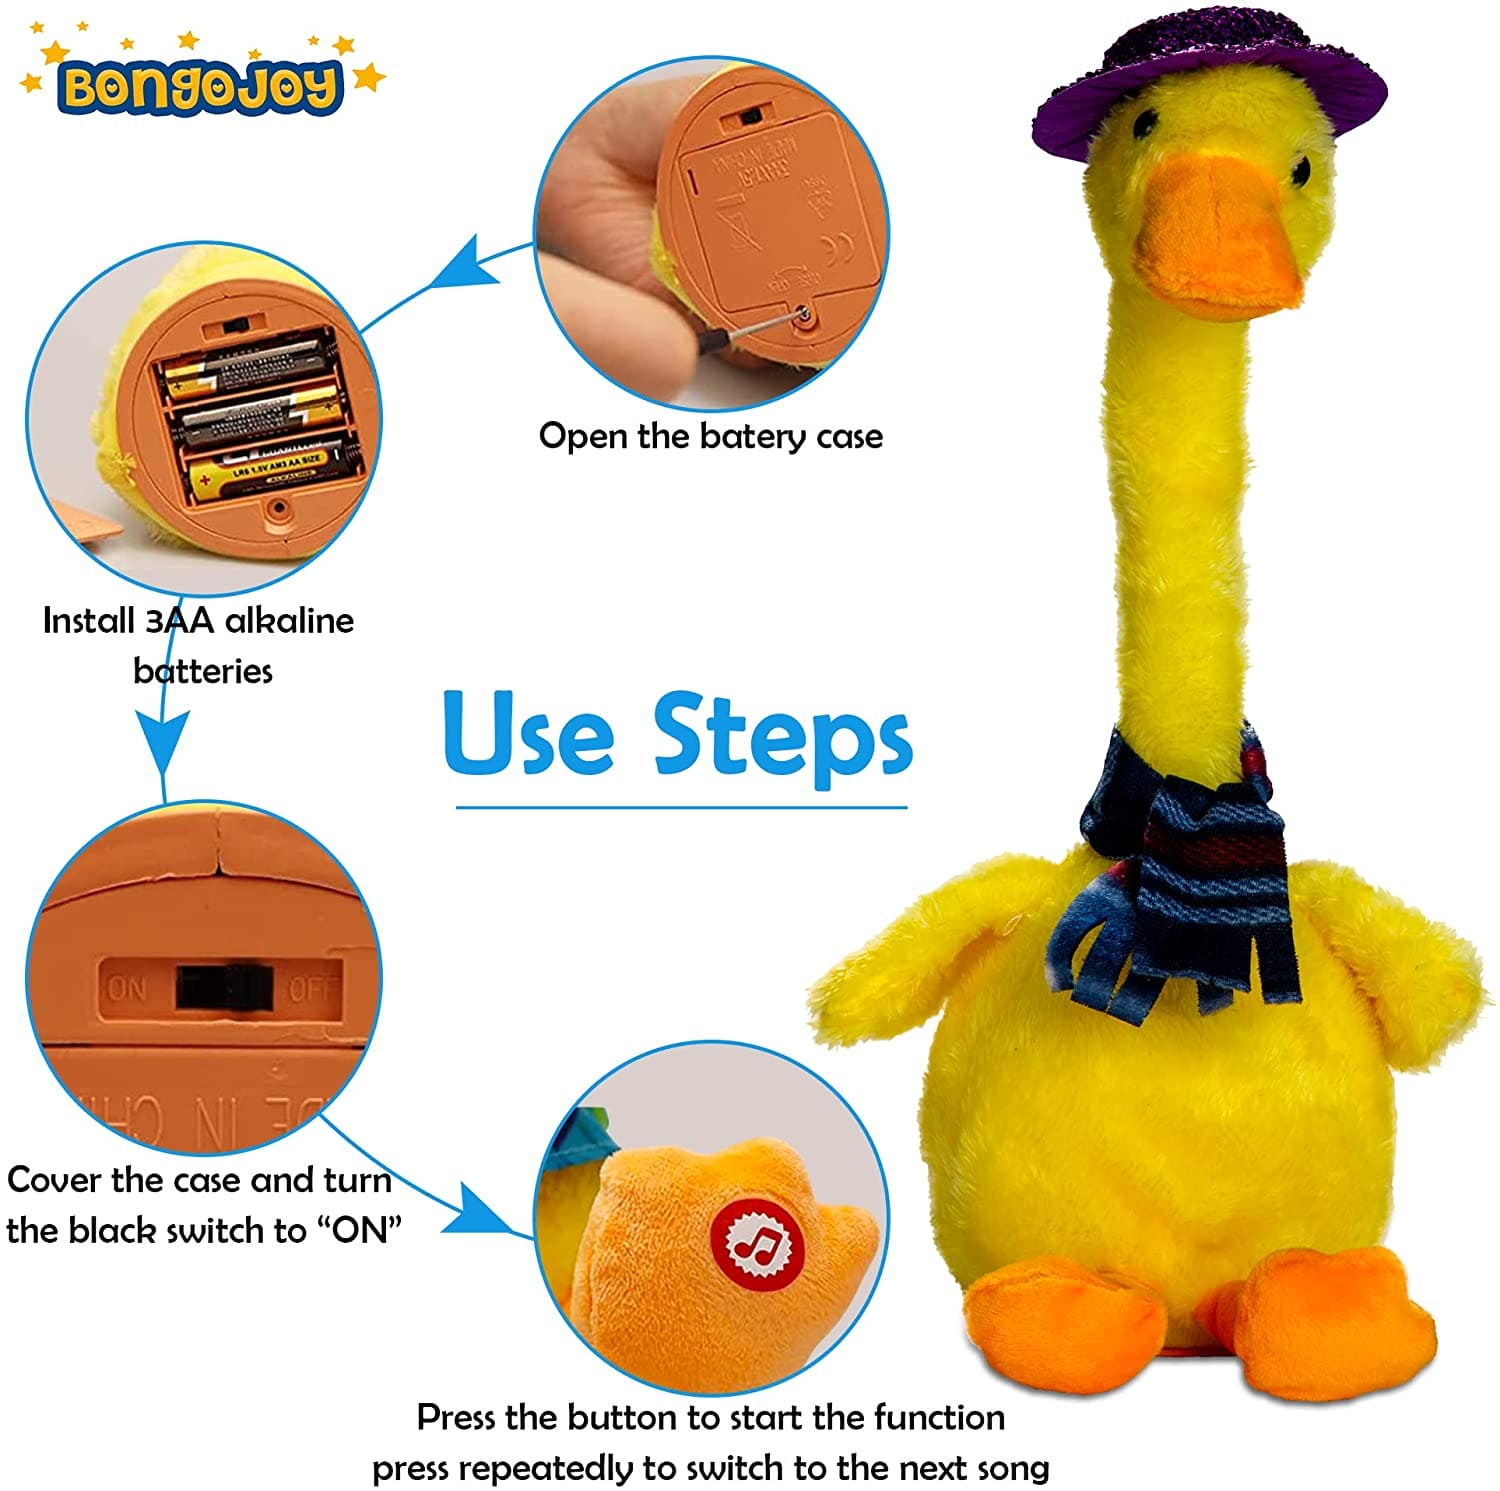 Lovely Talking Toy Dancing Duck, Electronic Dancing Ducks with Funny Clothes, Duck Plush Toy, Luminous Recording Learning to Speak Twisting Kid Toy, Speak Talk Sound Record Repeat Toy, Kids Education Toy